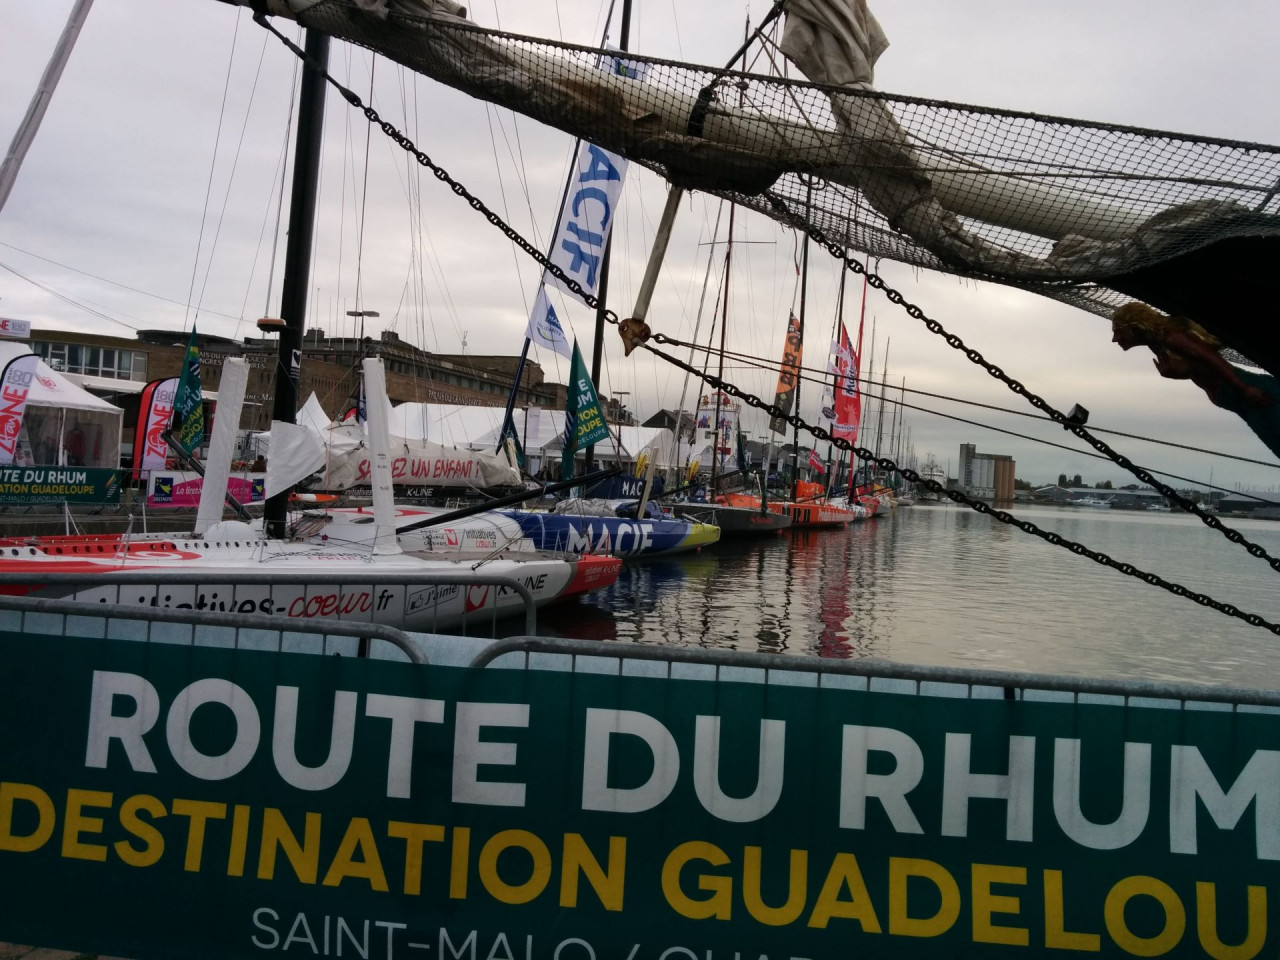 ROUTE DU RHUM : A higher performance level than ever before